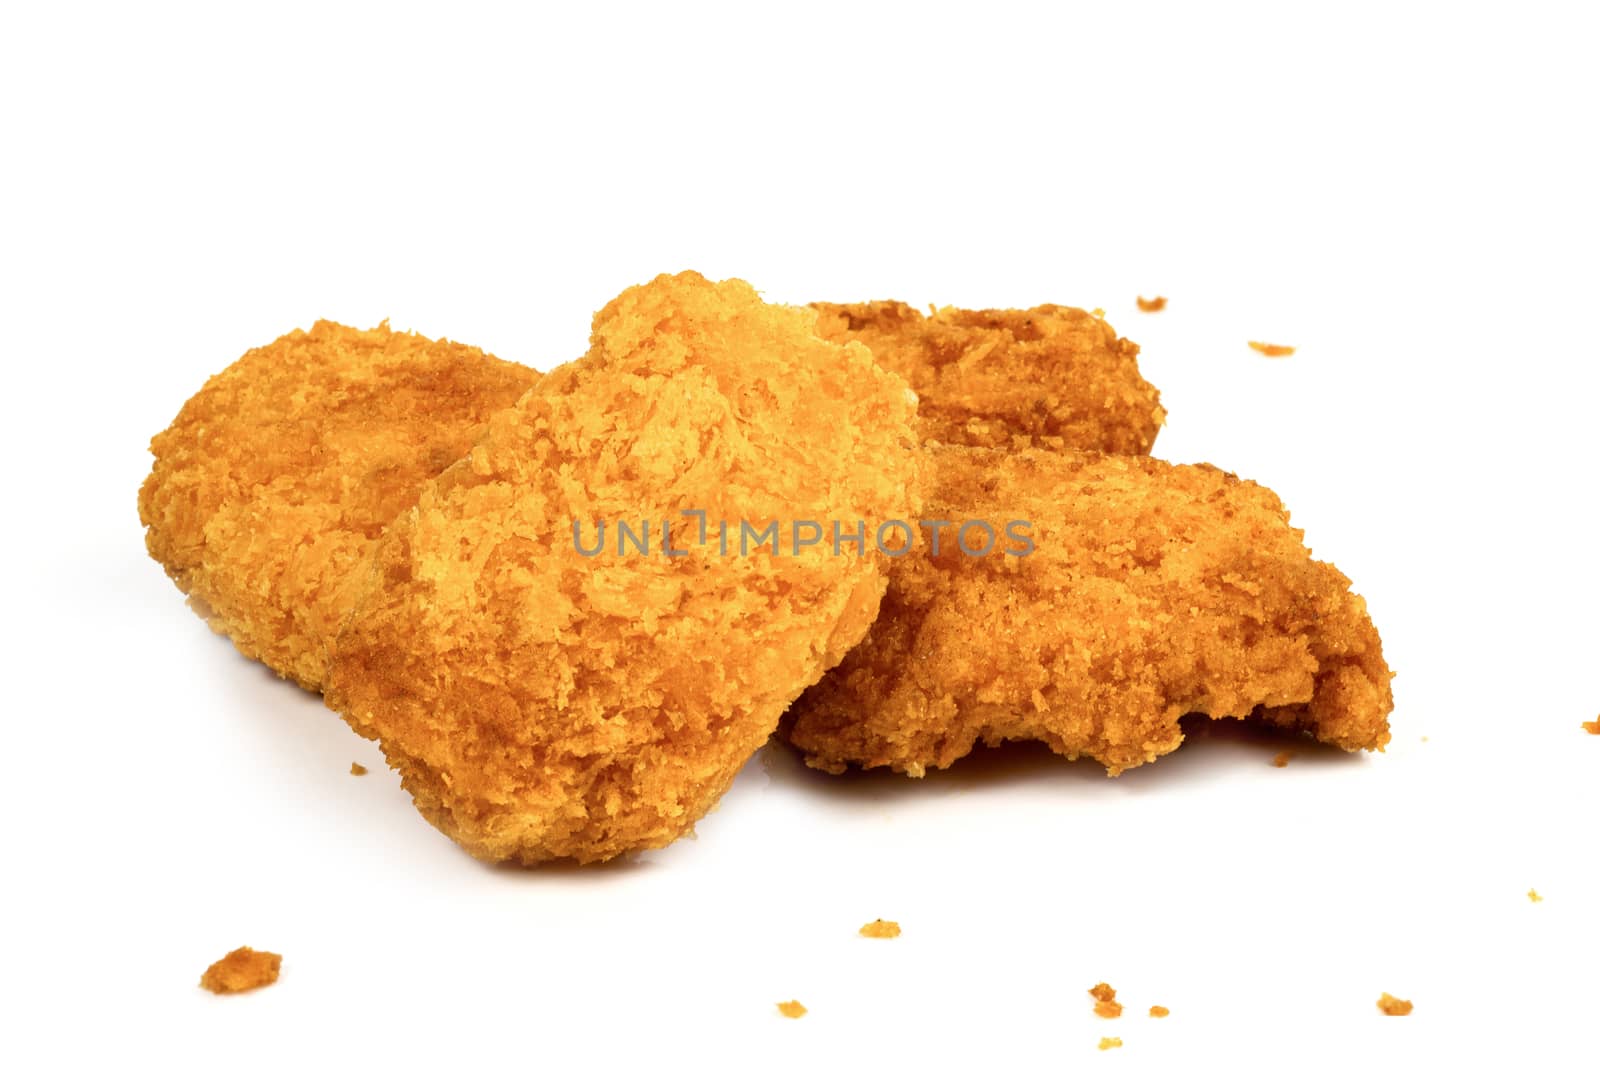 Fried Chicken Nuggets on a white background